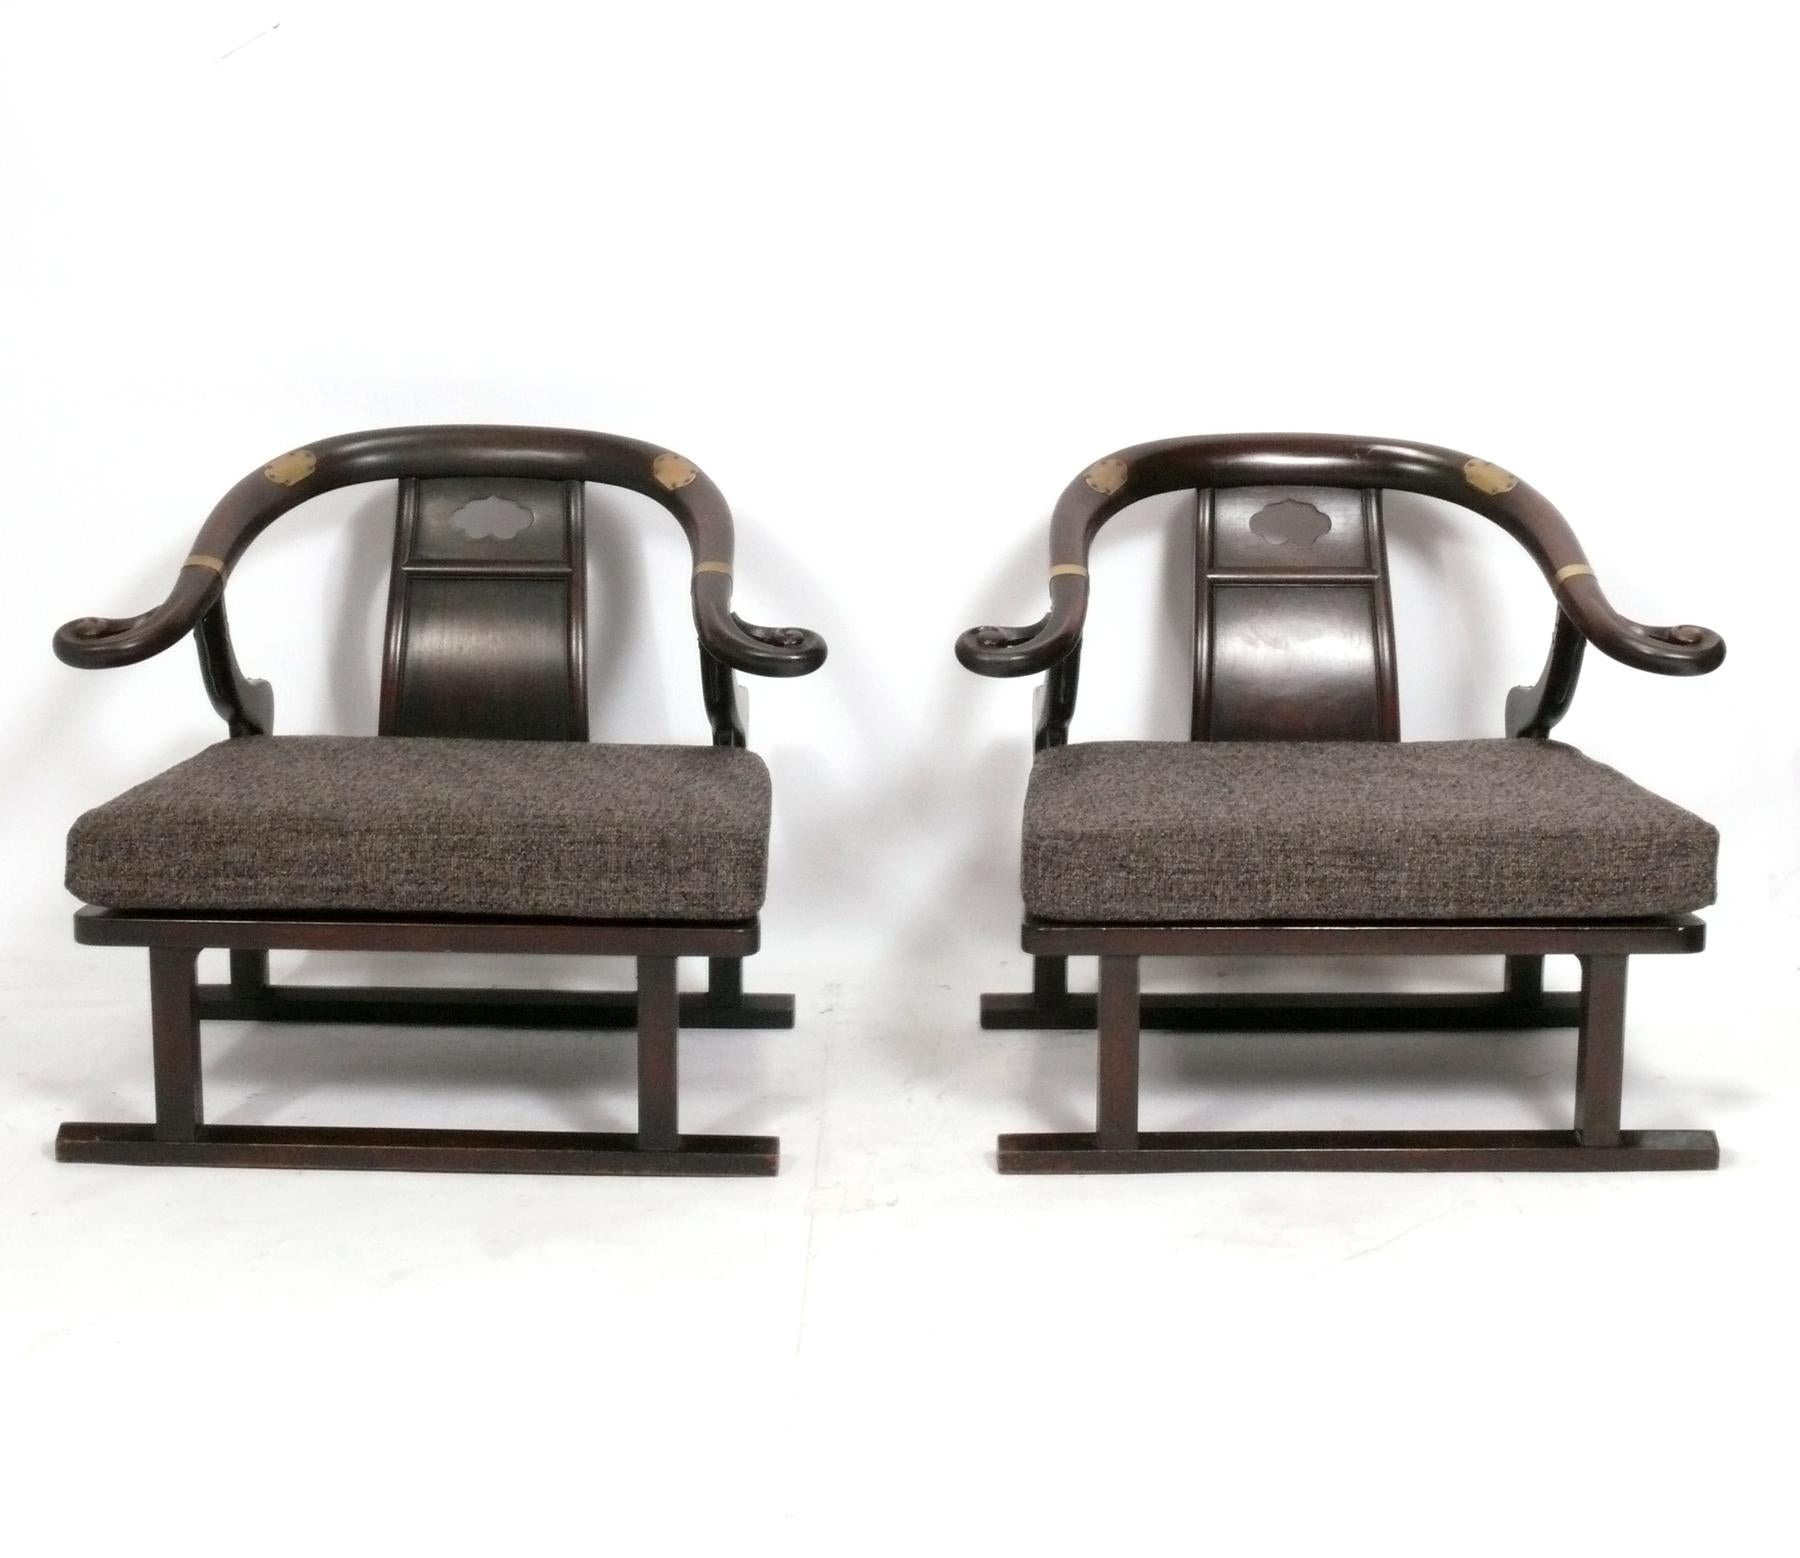 Pair of Low Slung Asian Influenced Lounge Chairs, designed by Michael Taylor for Baker's Far East Line, American, circa 1960s. They have been recently reupholstered and are ready to use.